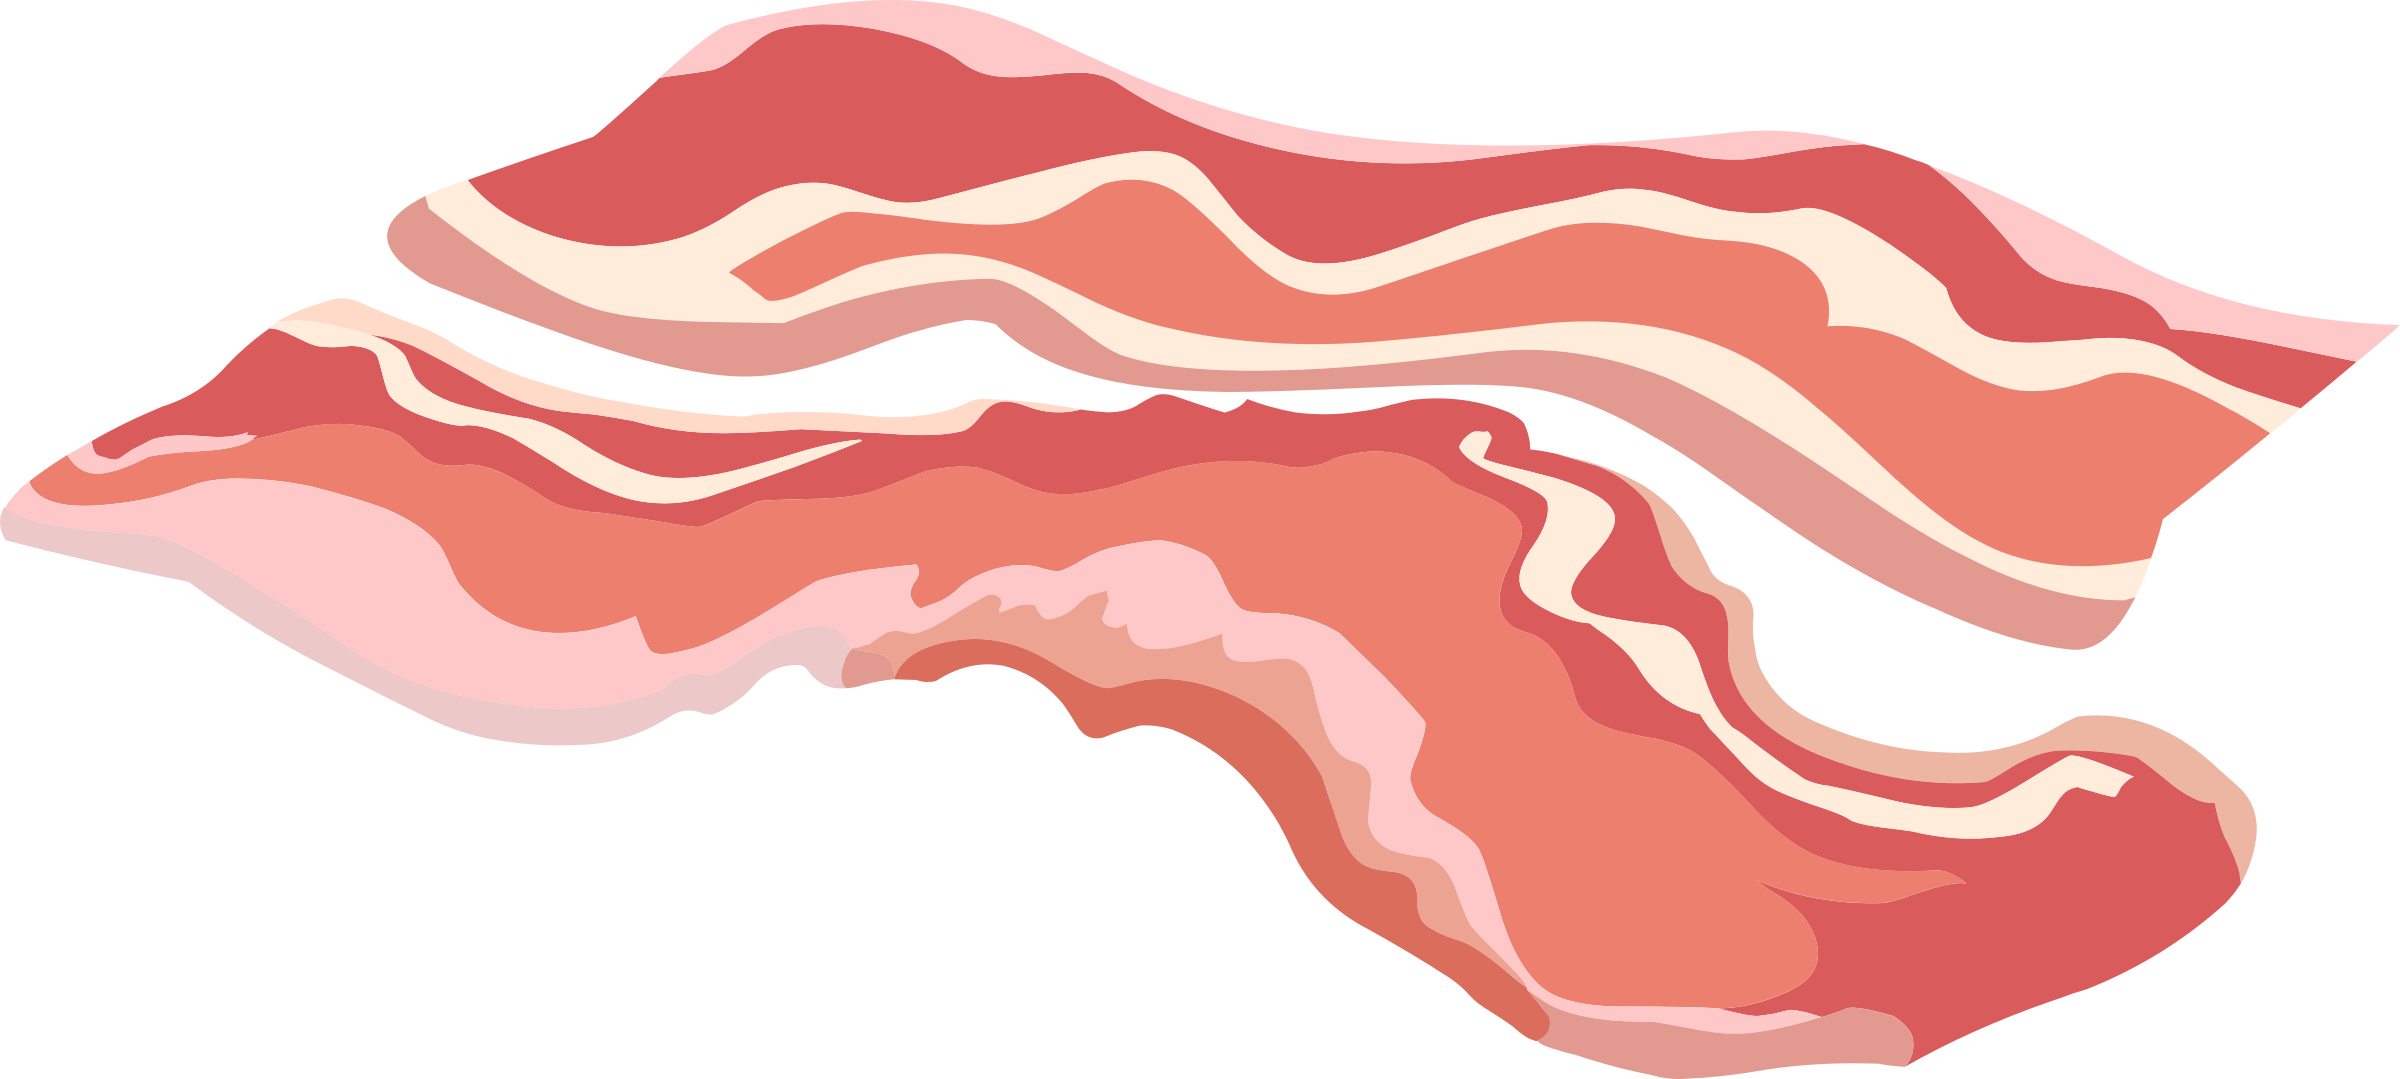 Bacon, egg and cheese sandwich Breakfast Clip art